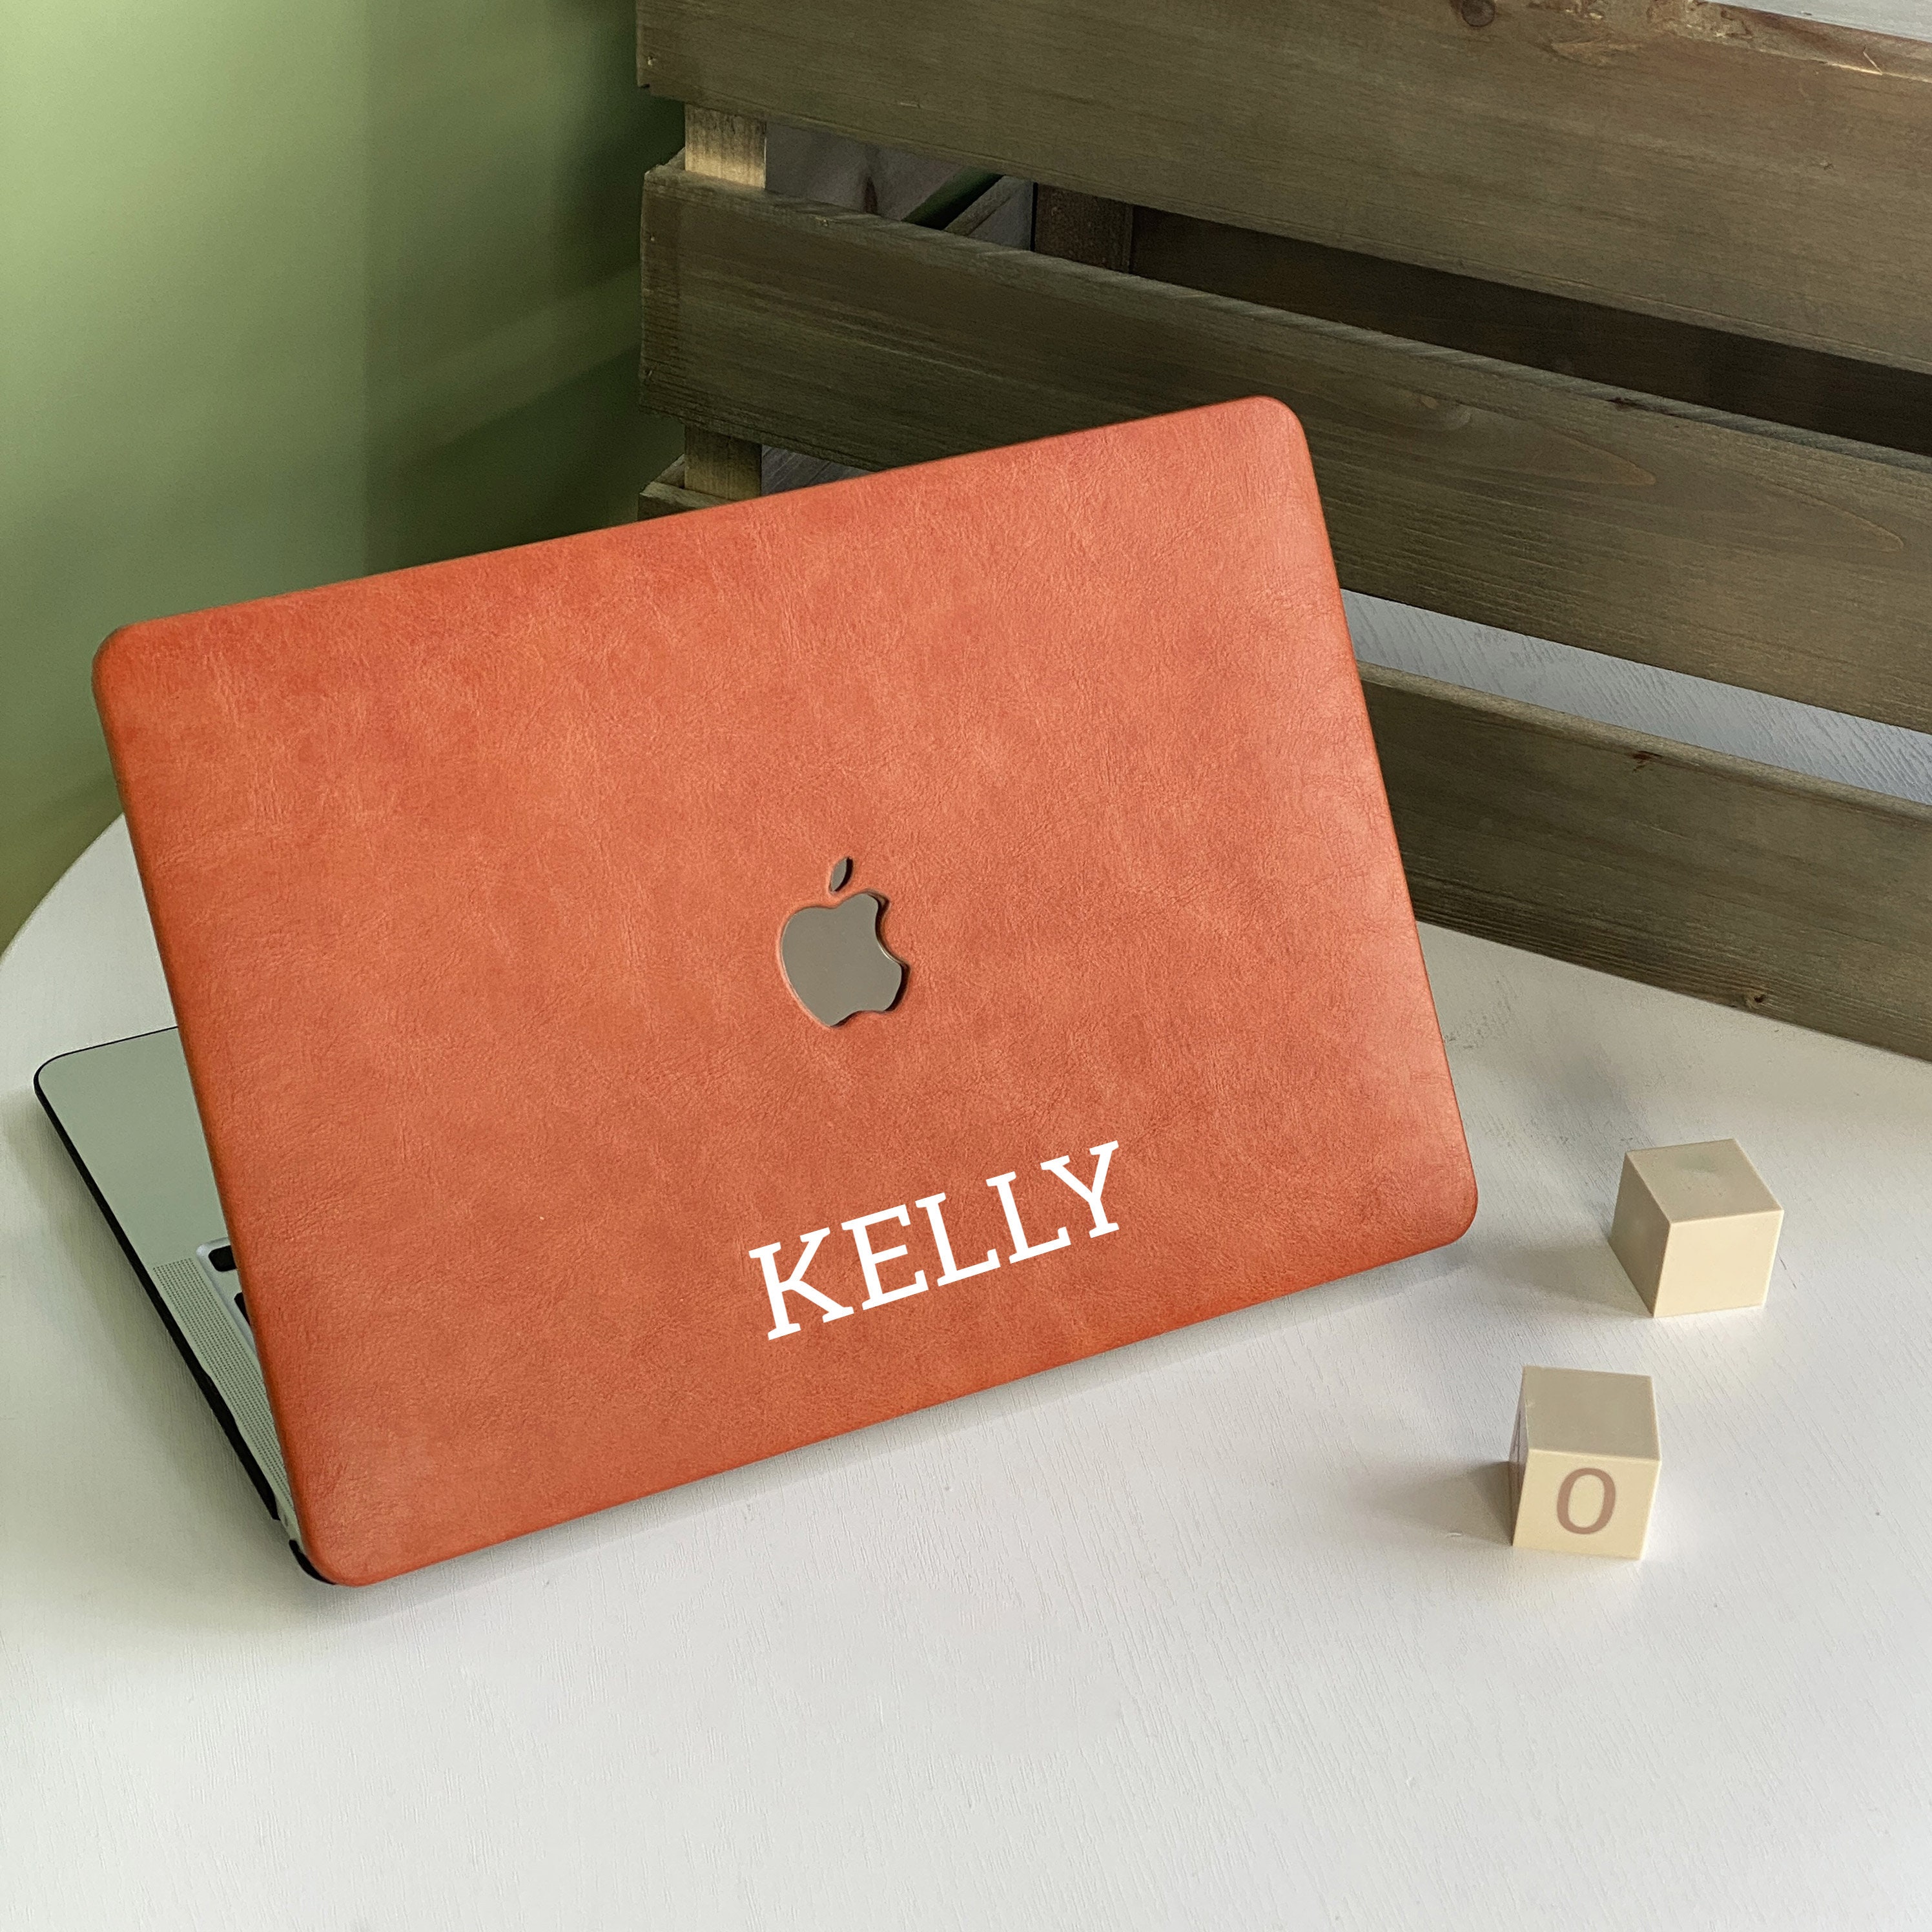 Laptop Cover Case For Macbook – Gifts for Designers